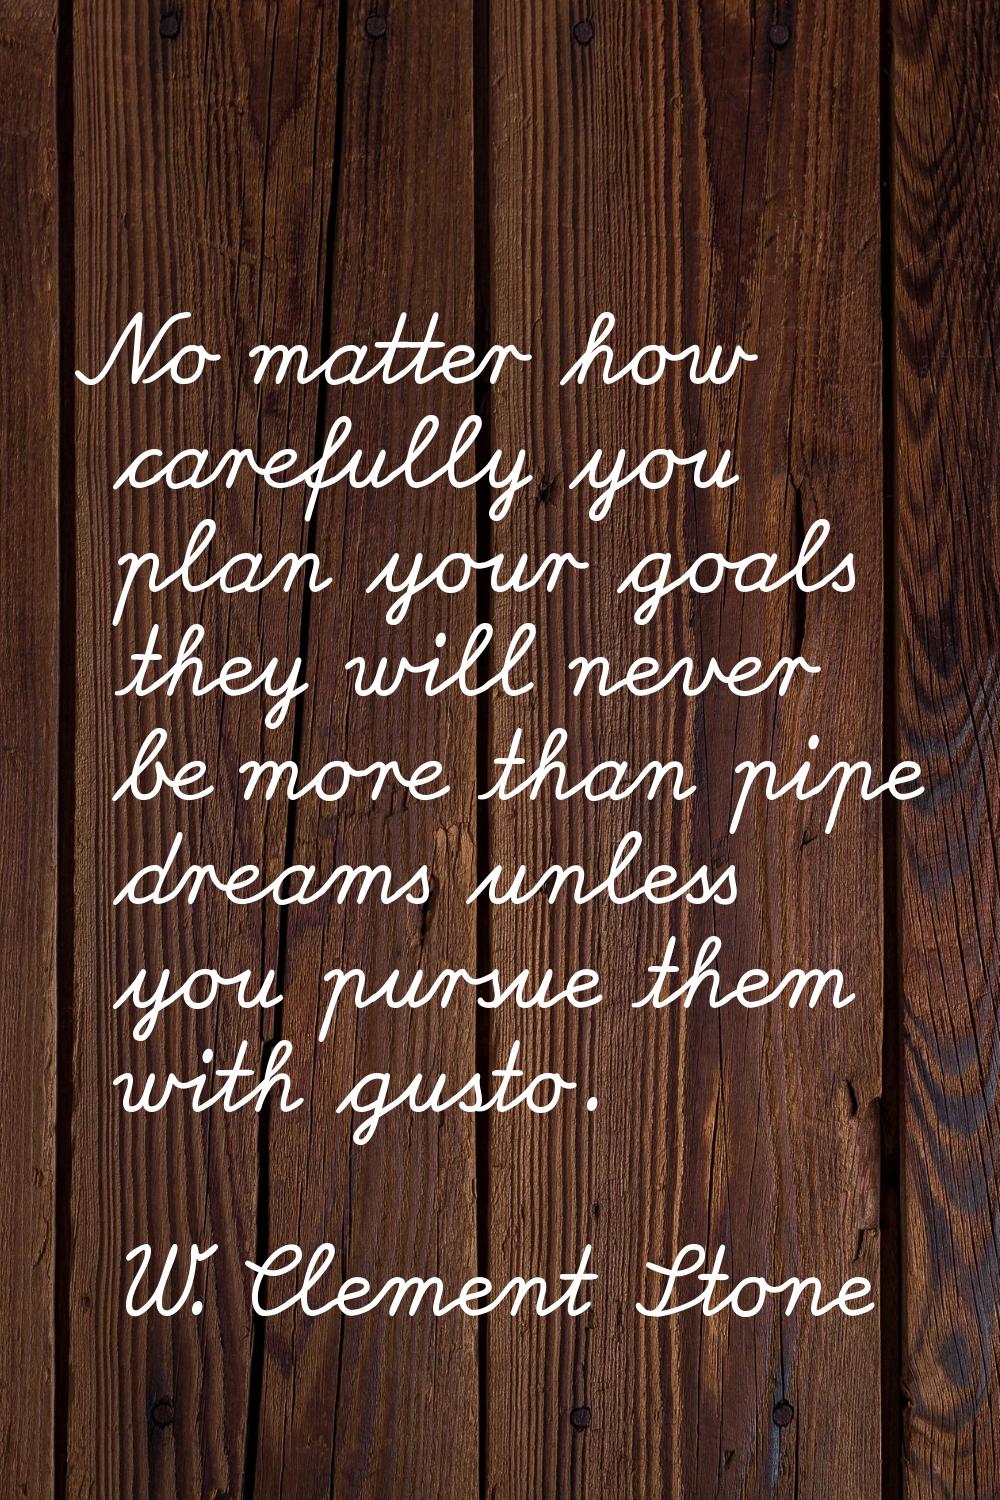 No matter how carefully you plan your goals they will never be more than pipe dreams unless you pur